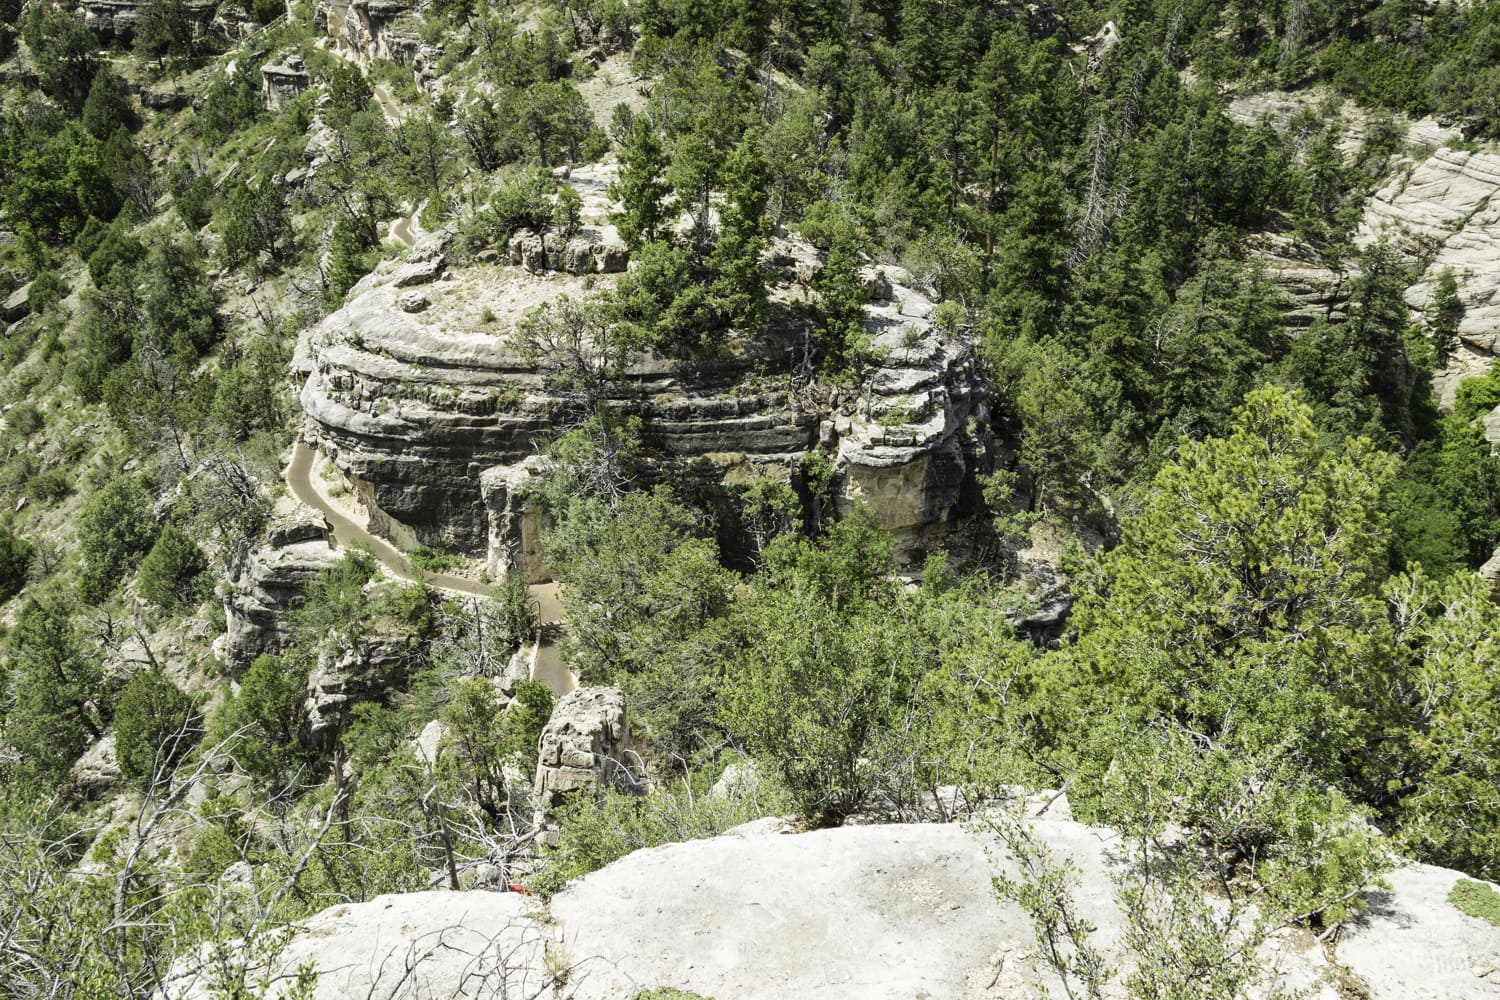 The Island Trail in Walnut Canyon National Monument